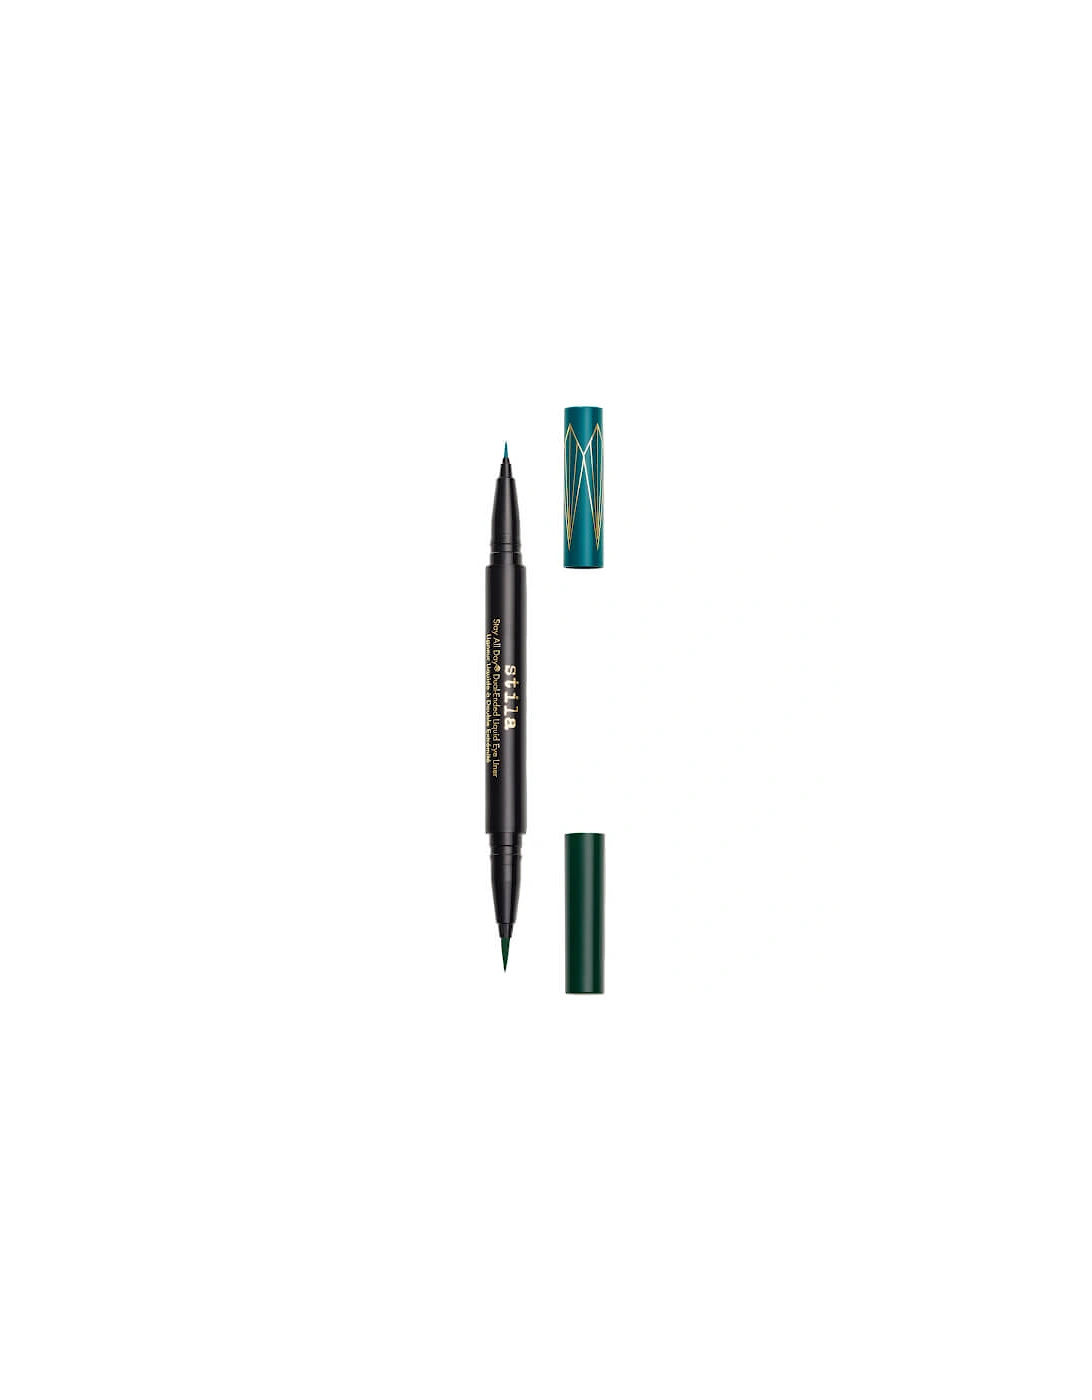 Stay All Day Dual-Ended Liquid Eye Liner - Teal/Intense Jade, 2 of 1